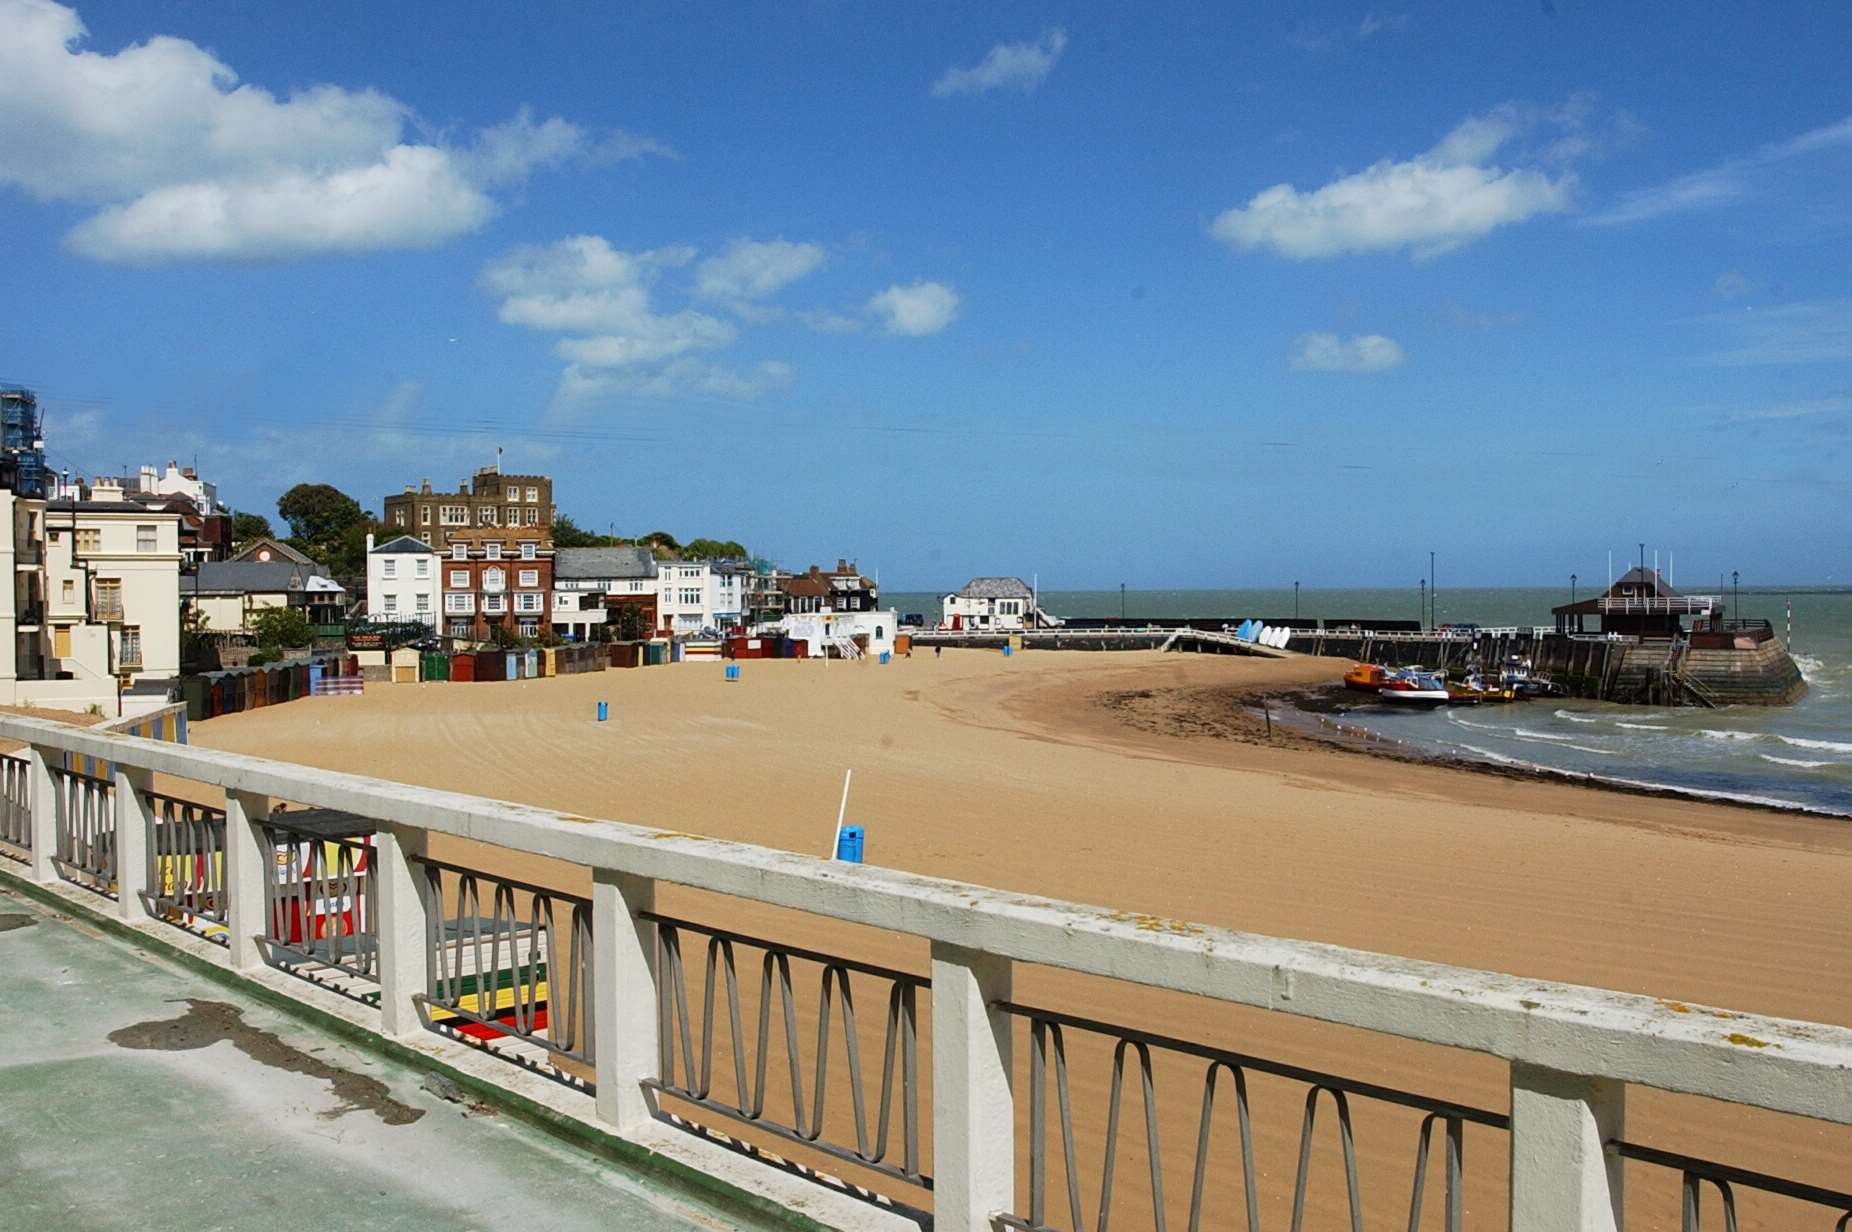 Magnificent Viking Bay is the main attraction in Broadstairs